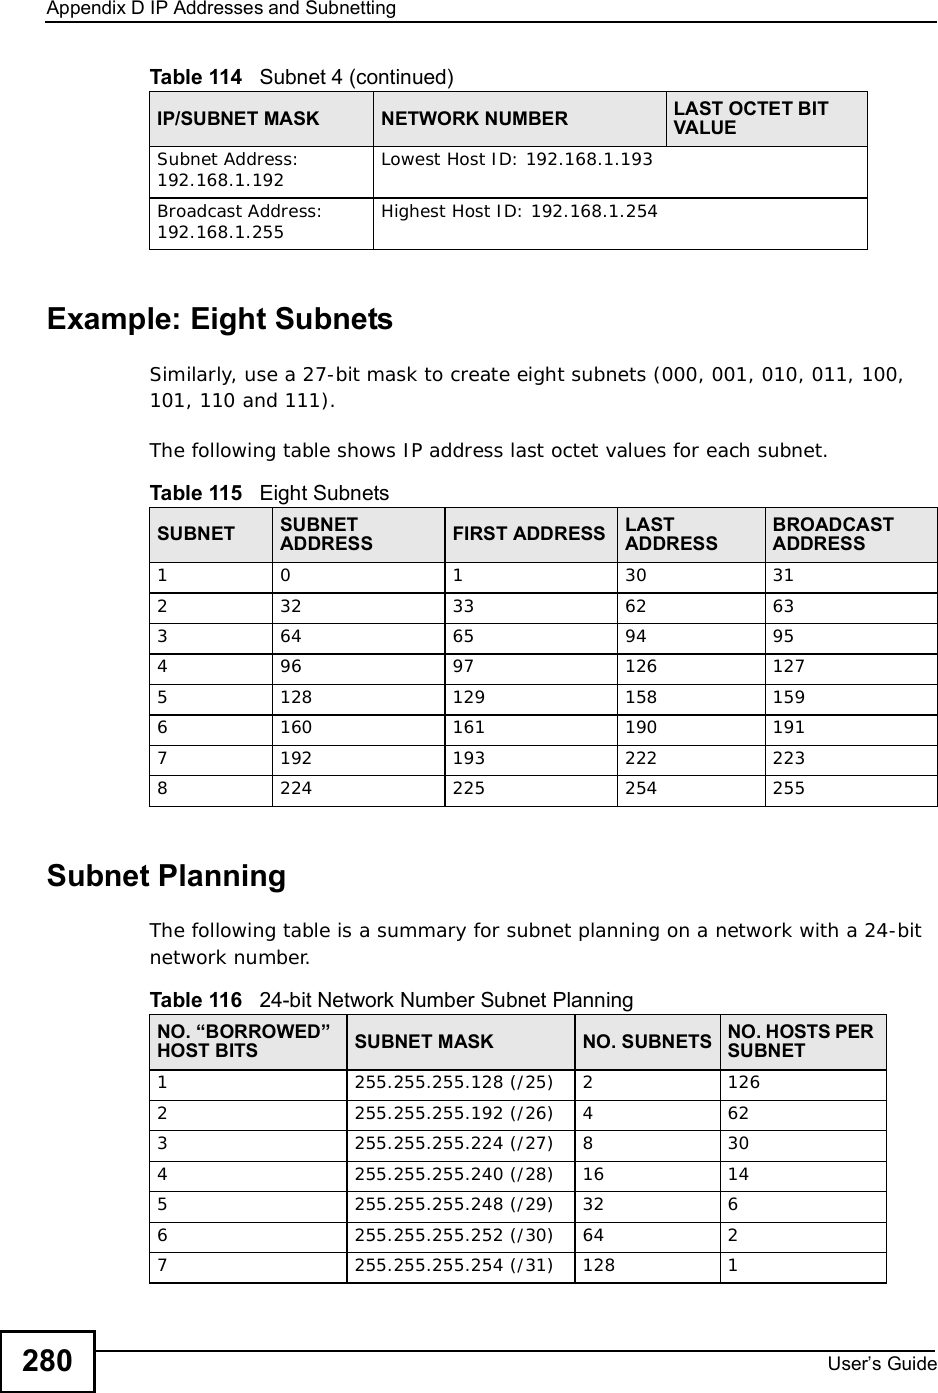 Appendix DIP Addresses and SubnettingUser s Guide280Example: Eight SubnetsSimilarly, use a 27-bit mask to create eight subnets (000, 001, 010, 011, 100, 101, 110 and 111). The following table shows IP address last octet values for each subnet.Subnet PlanningThe following table is a summary for subnet planning on a network with a 24-bit network number.Subnet Address: 192.168.1.192 Lowest Host ID: 192.168.1.193Broadcast Address: 192.168.1.255 Highest Host ID: 192.168.1.254Table 114   Subnet 4 (continued)IP/SUBNET MASK NETWORK NUMBER LAST OCTET BIT VALUETable 115   Eight SubnetsSUBNET SUBNET ADDRESS FIRST ADDRESS LAST ADDRESSBROADCAST ADDRESS10130 312 32 33 62 633 64 65 94 954 96 97 126 1275 128 129 158 1596 160 161 190 1917 192 193 222 2238 224 225 254 255Table 116   24-bit Network Number Subnet PlanningNO. “BORROWED” HOST BITS SUBNET MASK NO. SUBNETS NO. HOSTS PER SUBNET1255.255.255.128 (/25) 2 1262 255.255.255.192 (/26) 4 623 255.255.255.224 (/27) 8 304 255.255.255.240 (/28) 16 145 255.255.255.248 (/29) 32 66 255.255.255.252 (/30) 64 27 255.255.255.254 (/31) 128 1